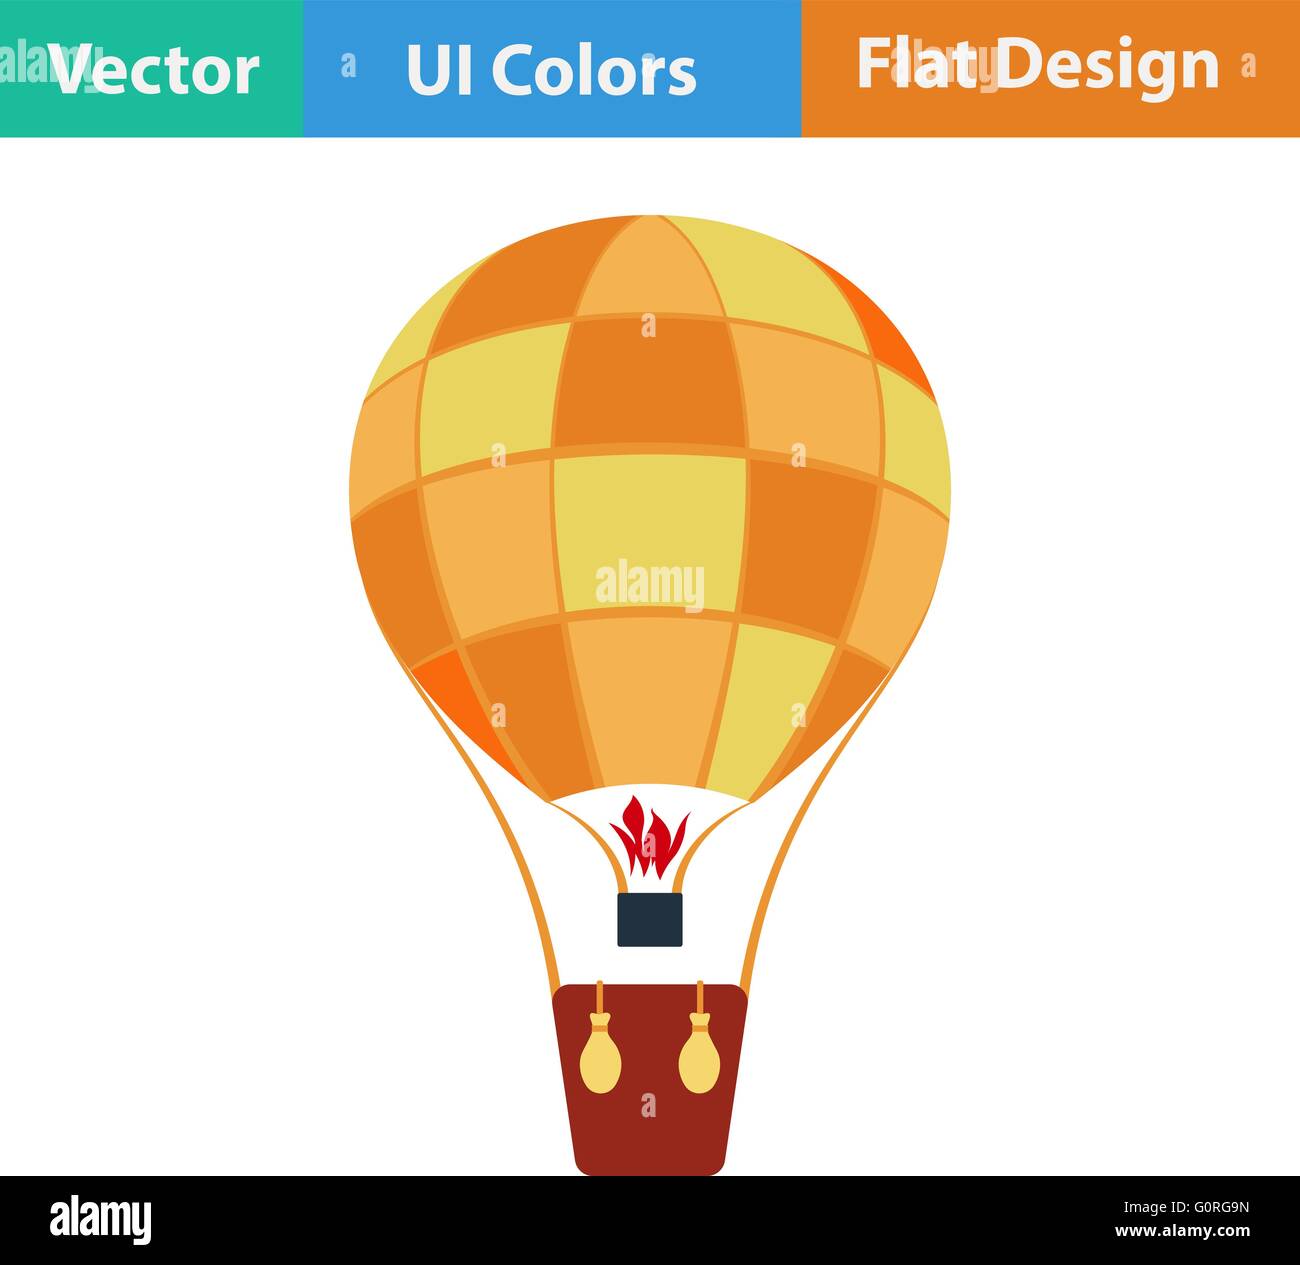 Flat design icon of hot air balloon in ui colors. Vector illustration. Stock Vector